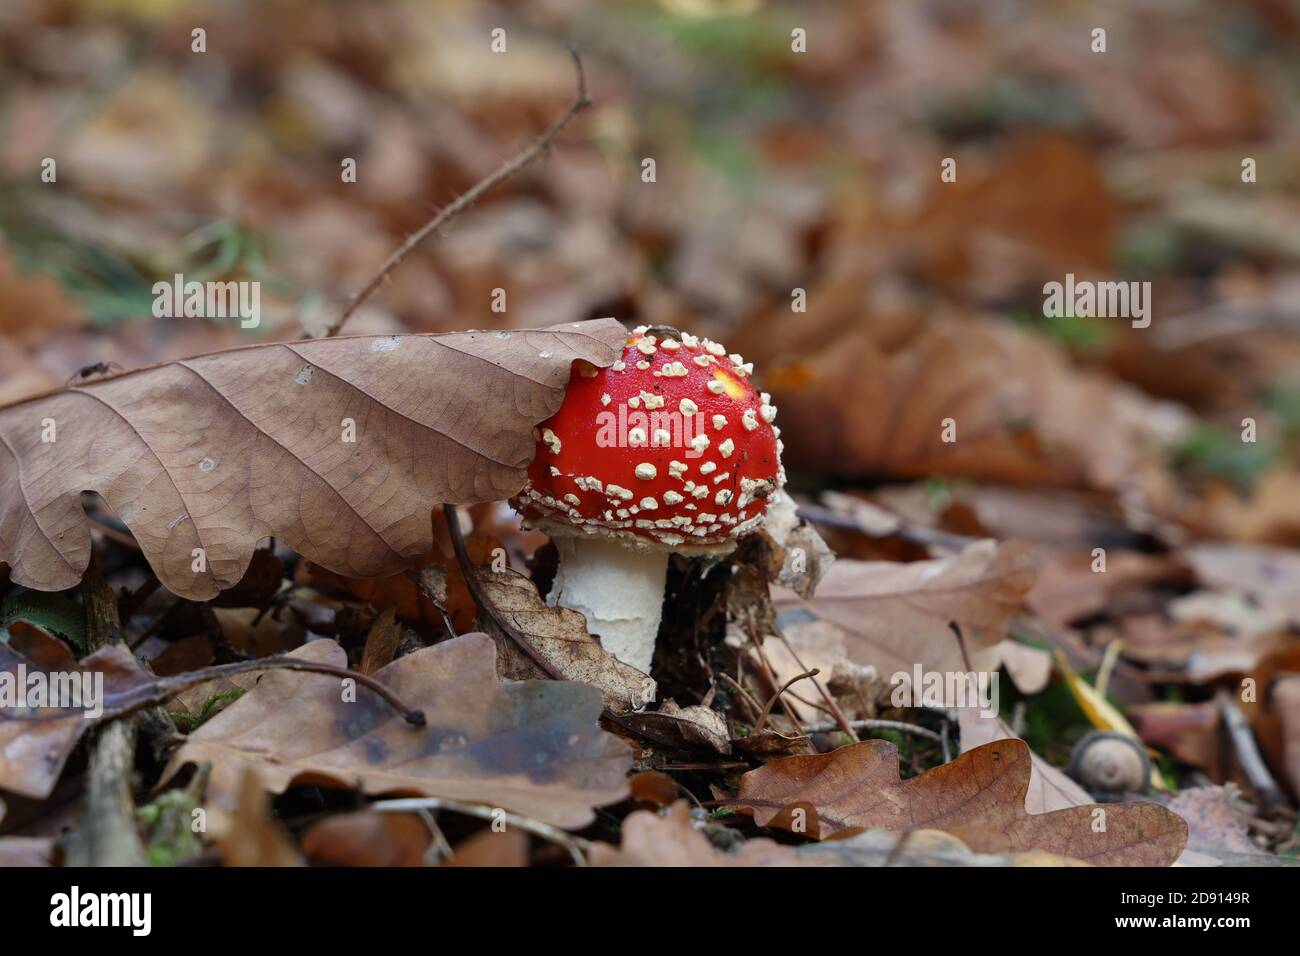 Closeup shot of Amanita muscaria mushroom in the forest. Stock Photo